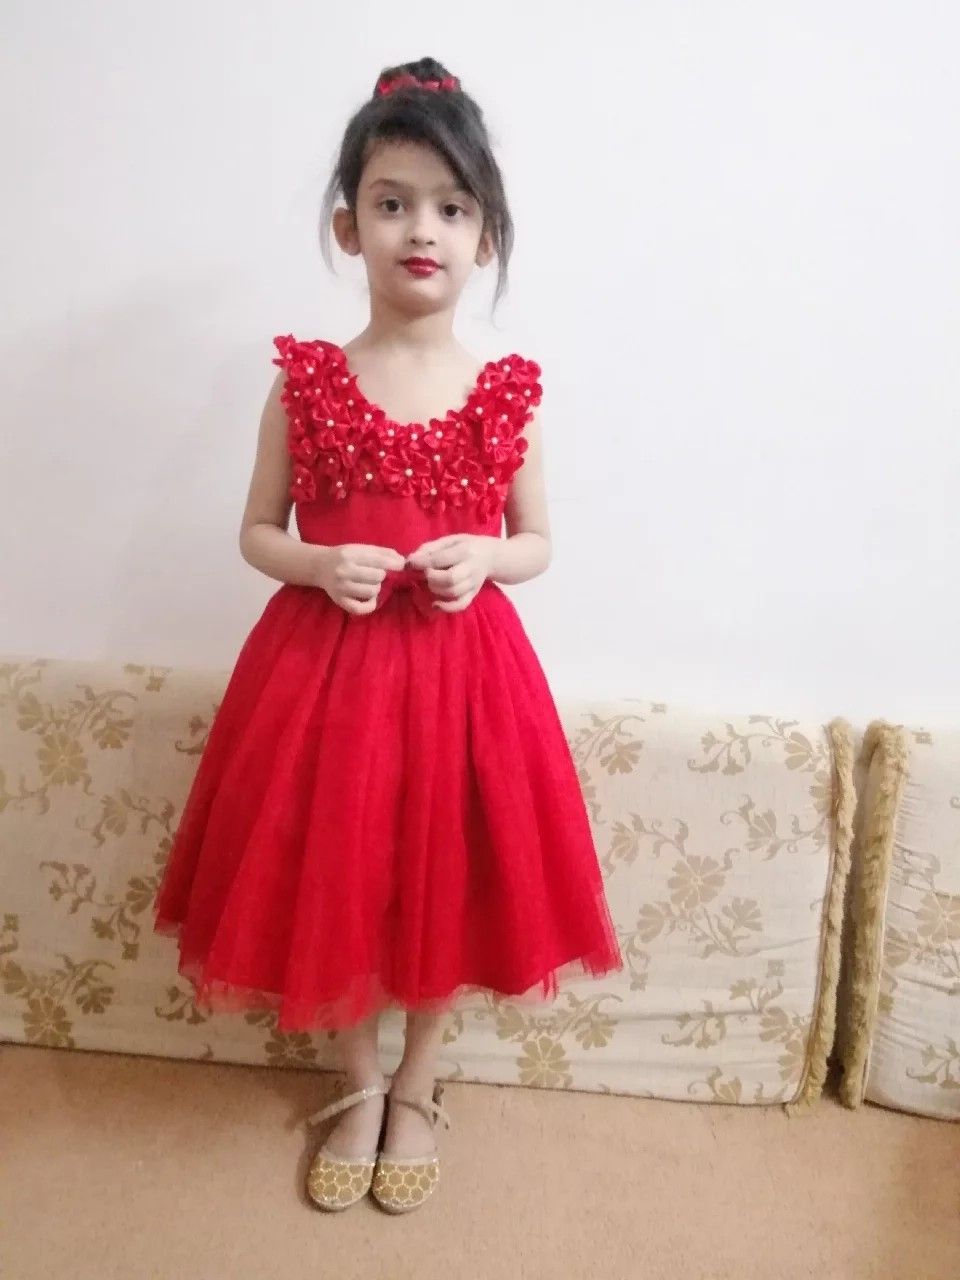 Buy Fairy Frocks for Baby Girls With Top Quality And Designs - Alibaba.com-lmd.edu.vn